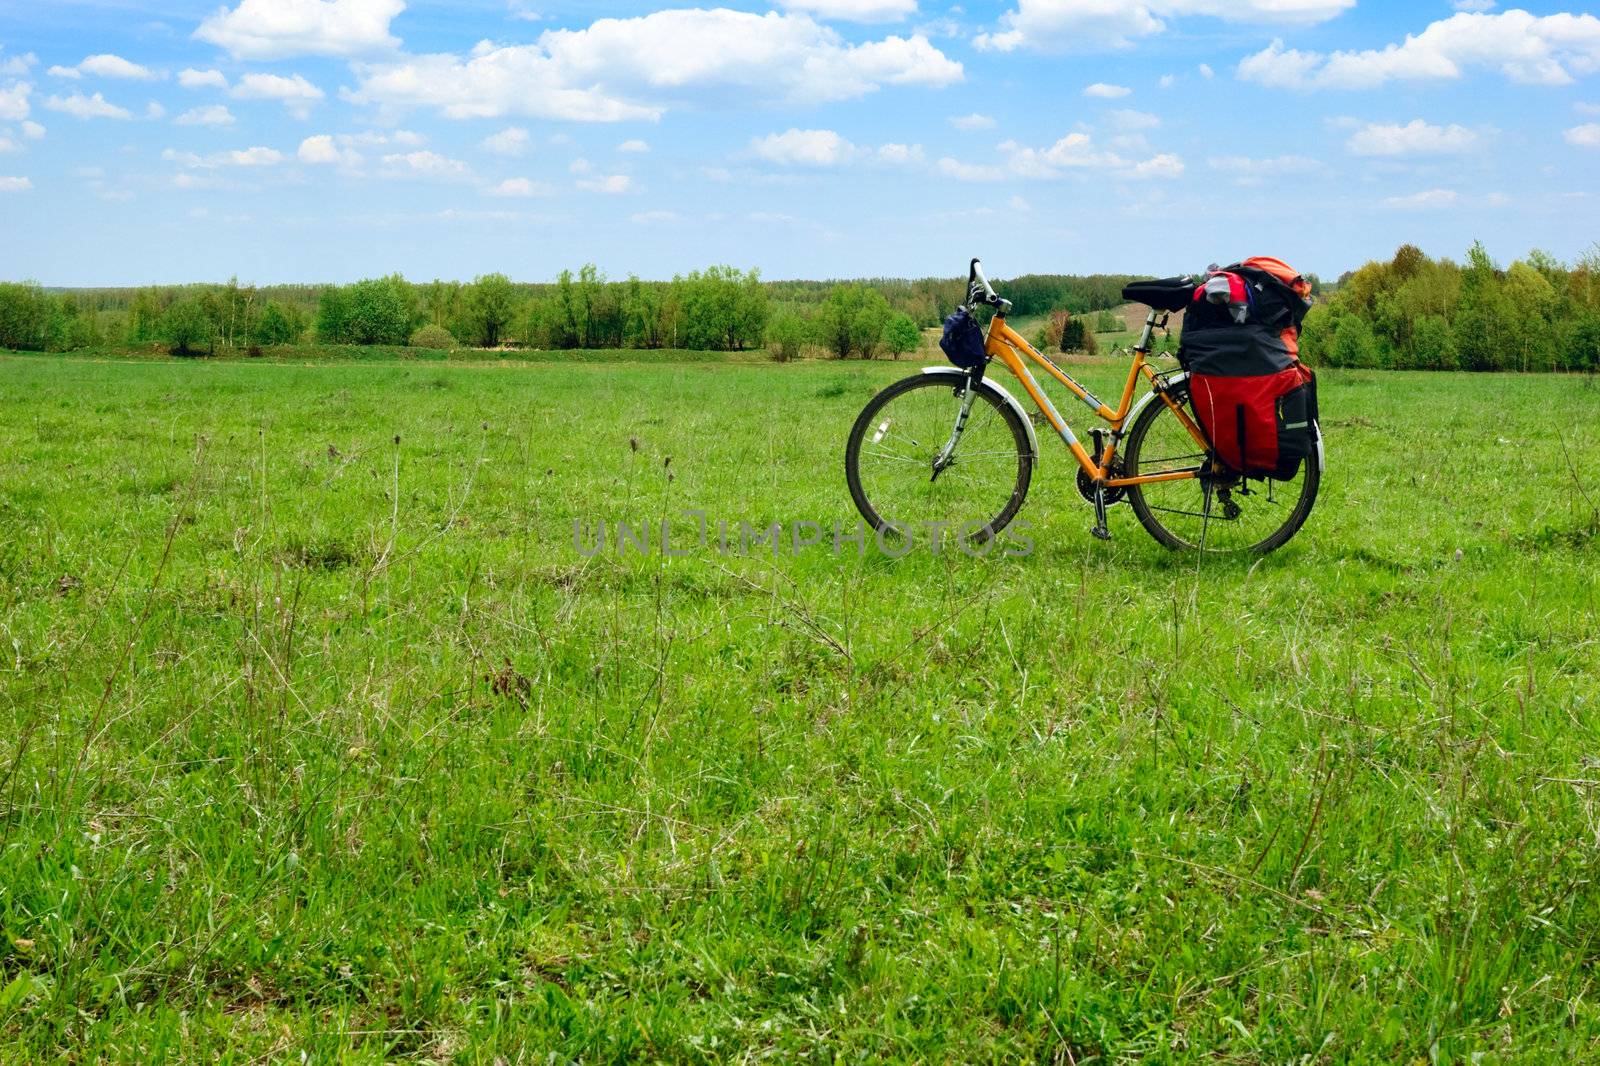 Loaded touring bicycle on rest break in field